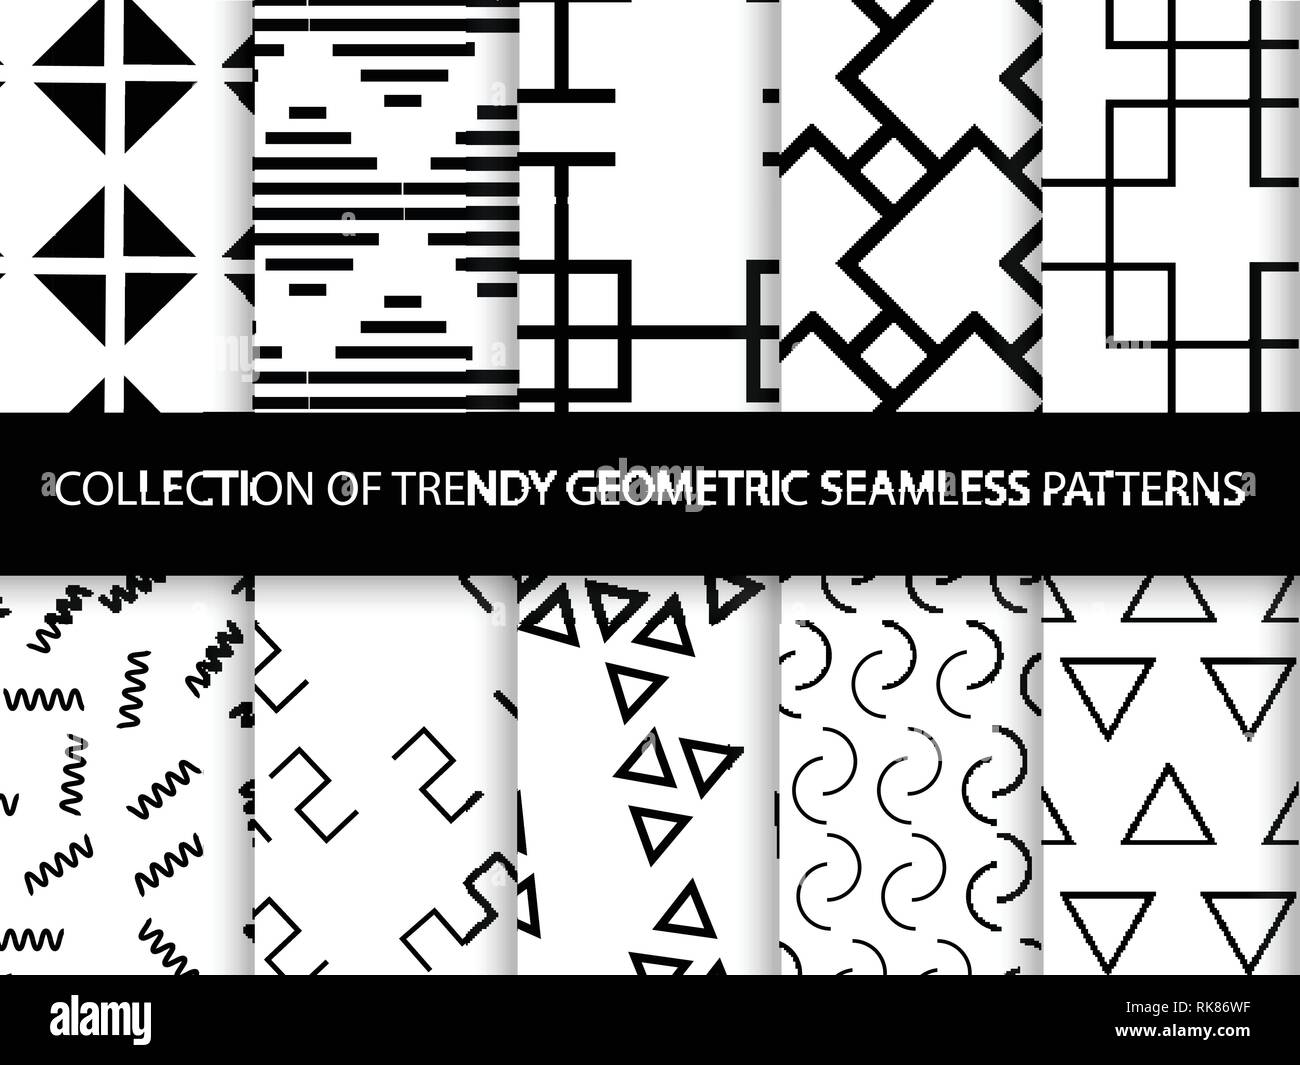 Collection of swatches memphis patterns - seamless. Retro fashion style 80-90s. Stock Vector